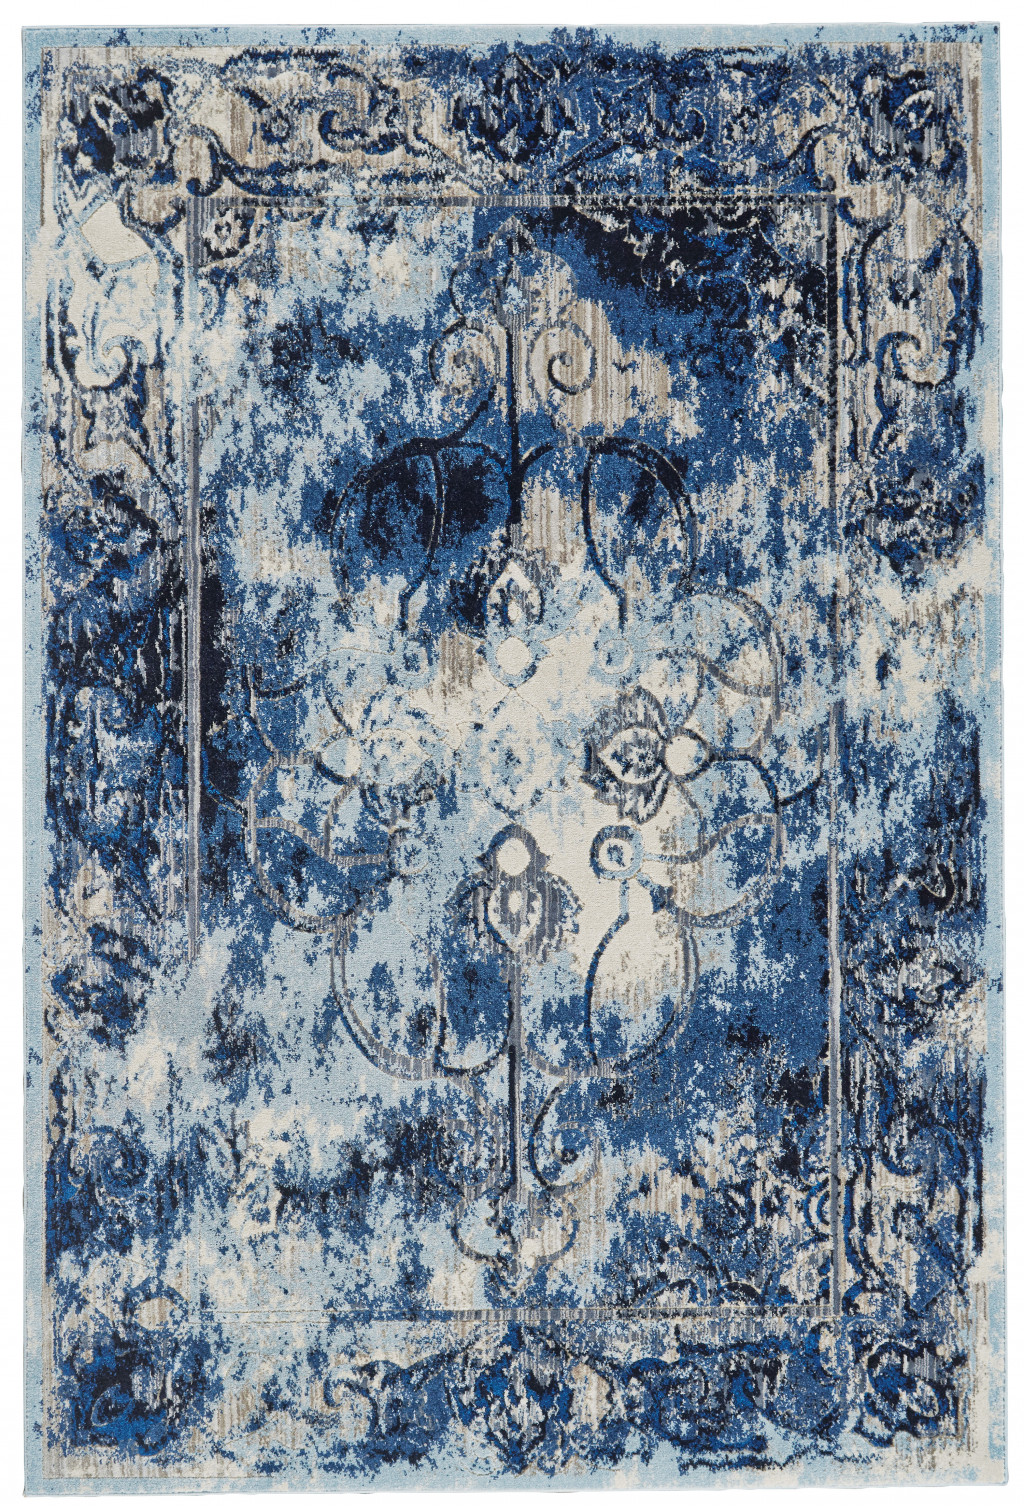 2' X 4' Blue Ivory And Gray Floral Distressed Stain Resistant Area Rug-511241-1